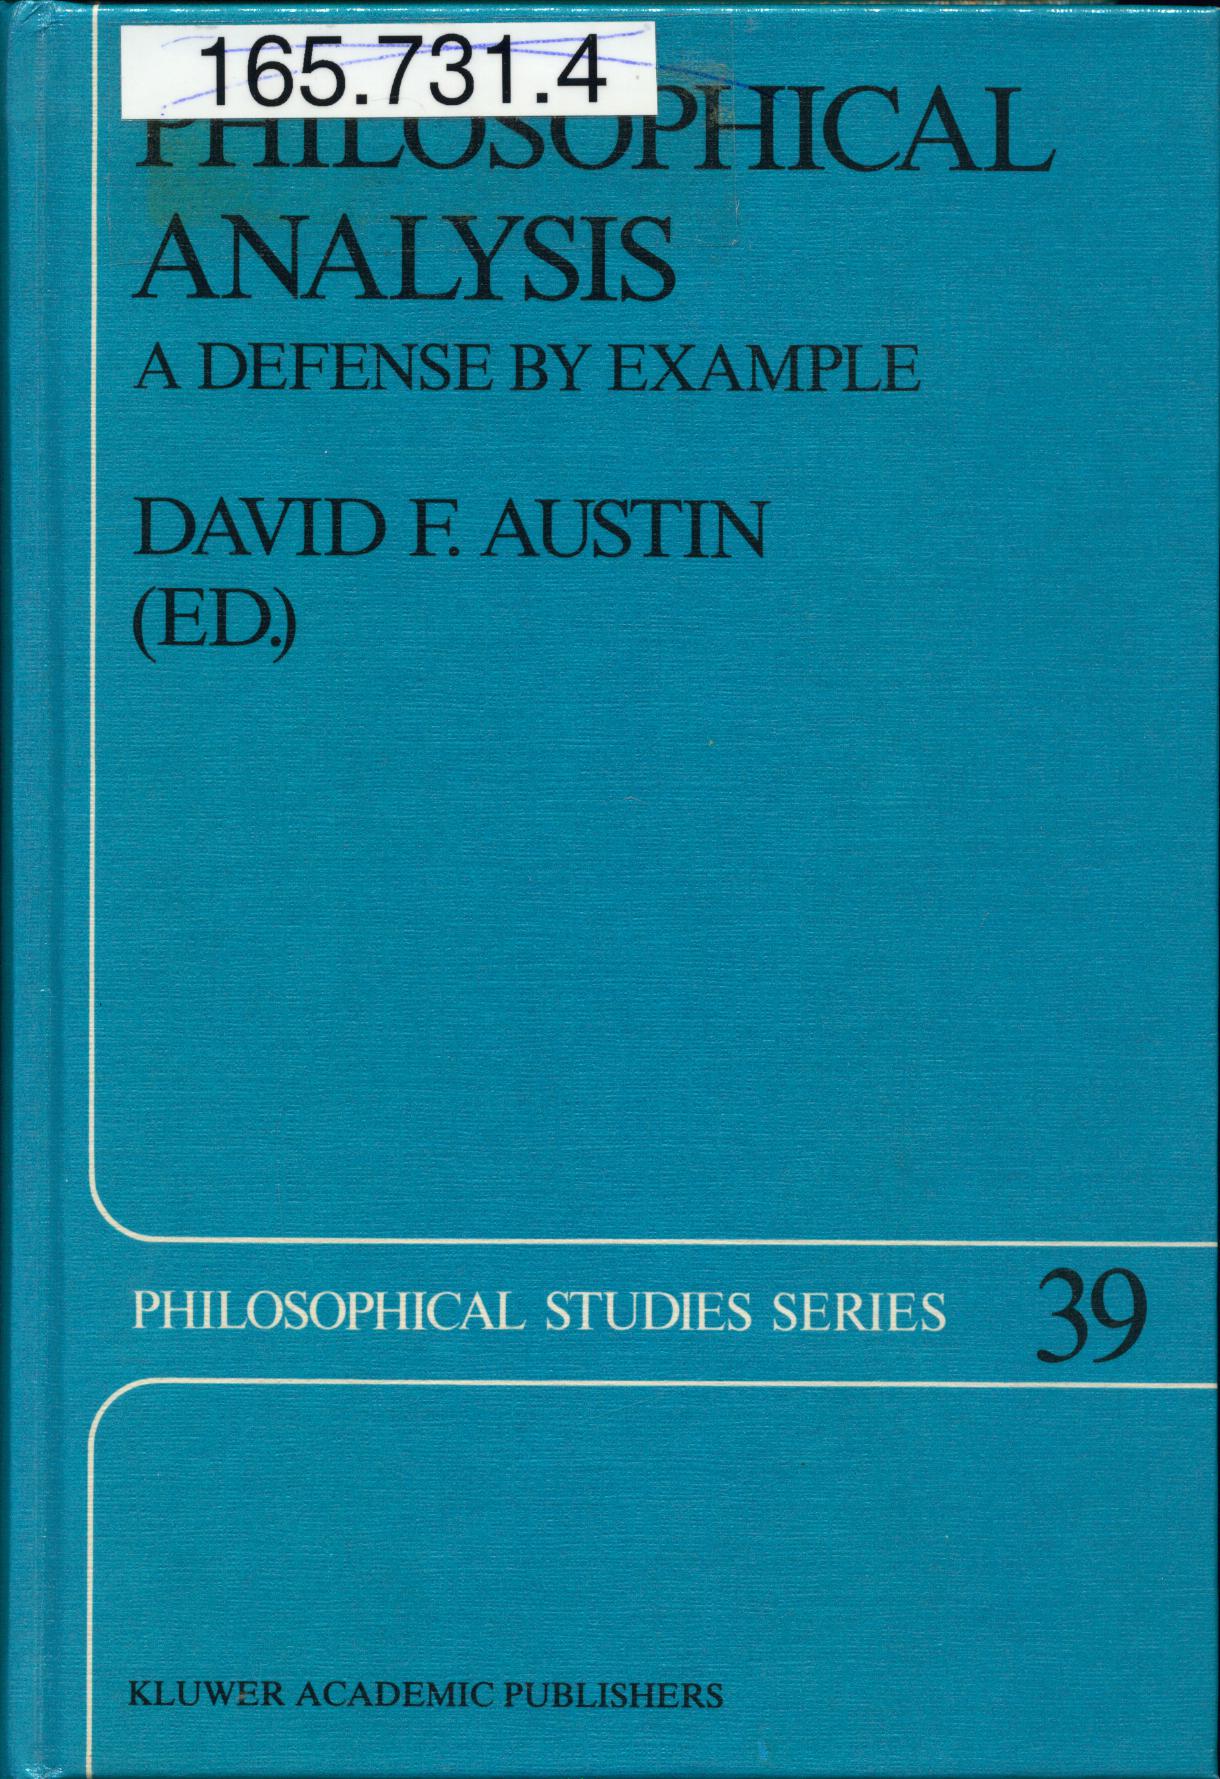 Philosophical Analysis A Defense by Example - Austin, David F.